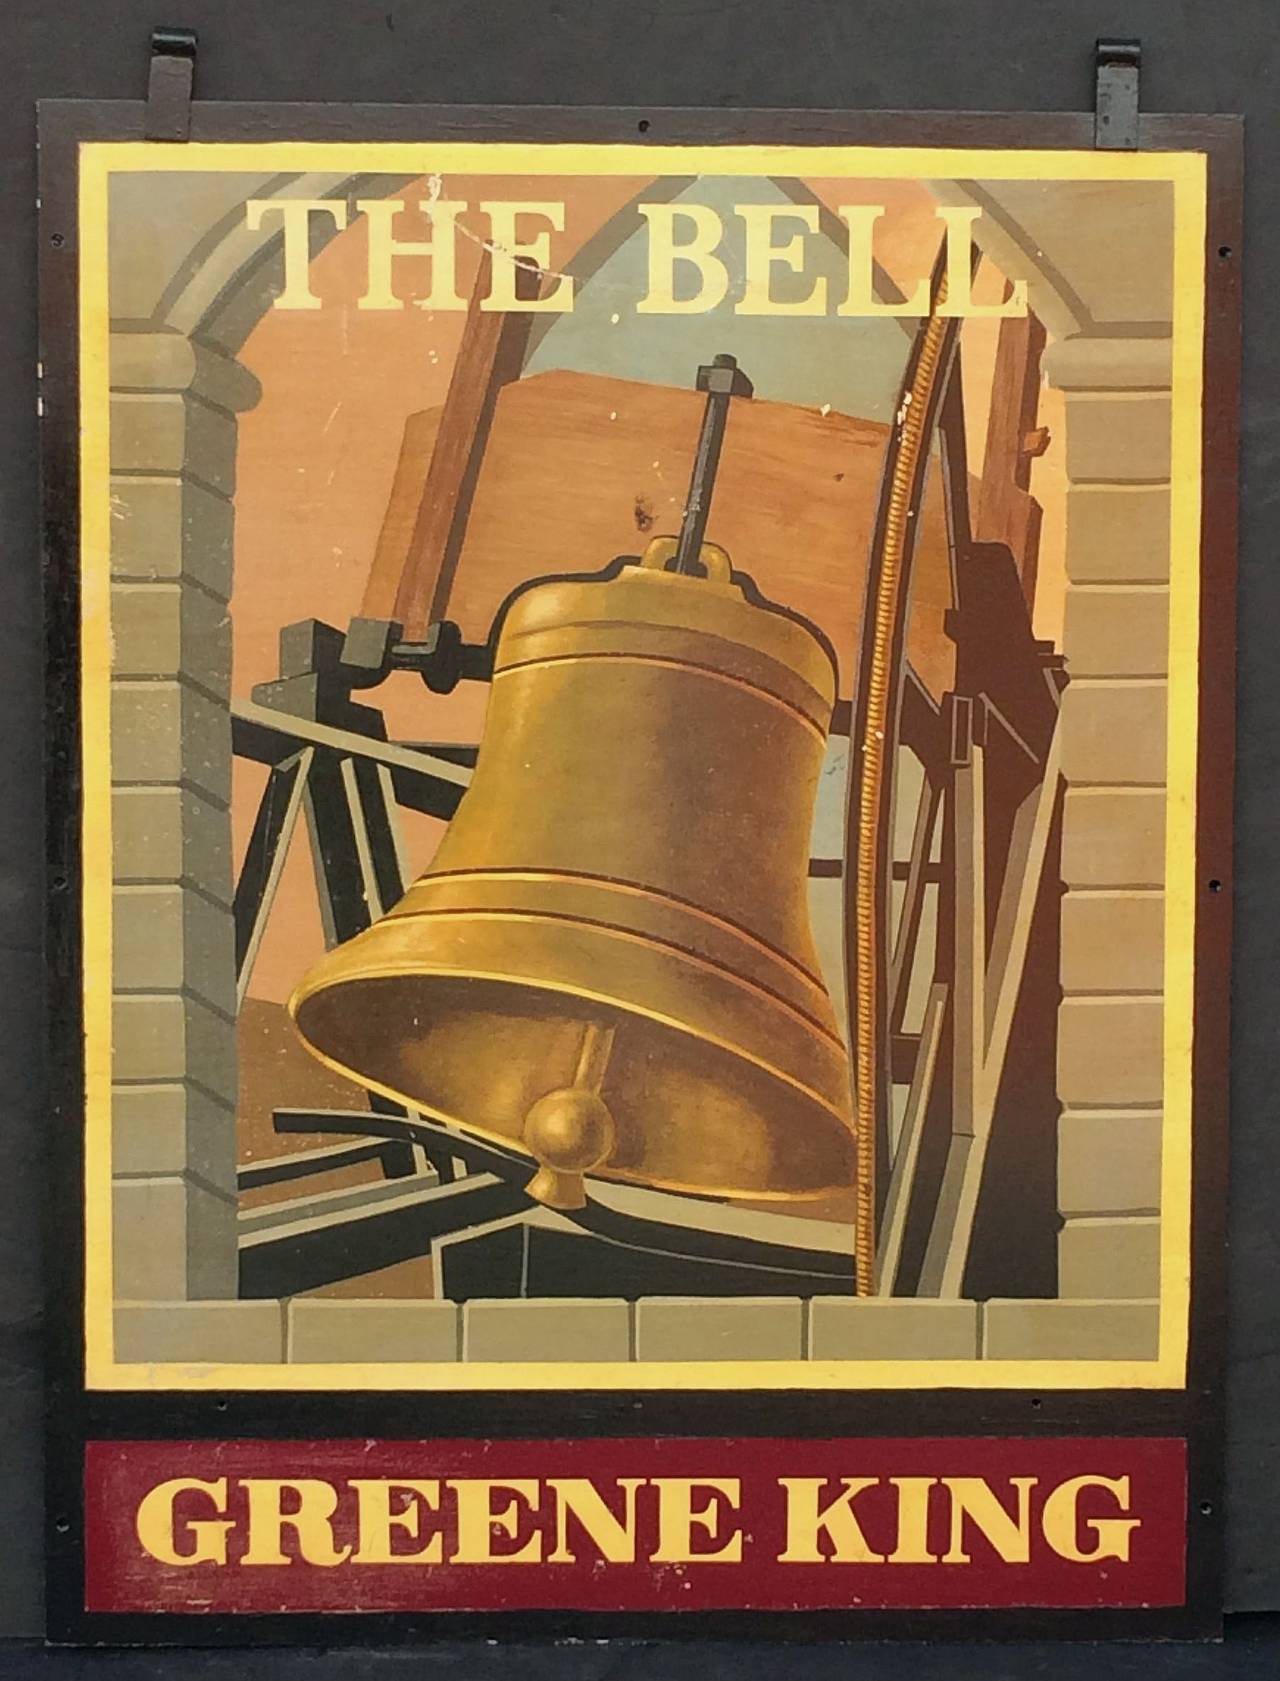 An authentic English pub sign (two-sided) featuring a painting of a tower or church bell ringing, entitled: The Bell, from an original Greene King pub.

Marked: Greene King (Greene King is a British brewery established in 1799 in Bury St Edmunds,